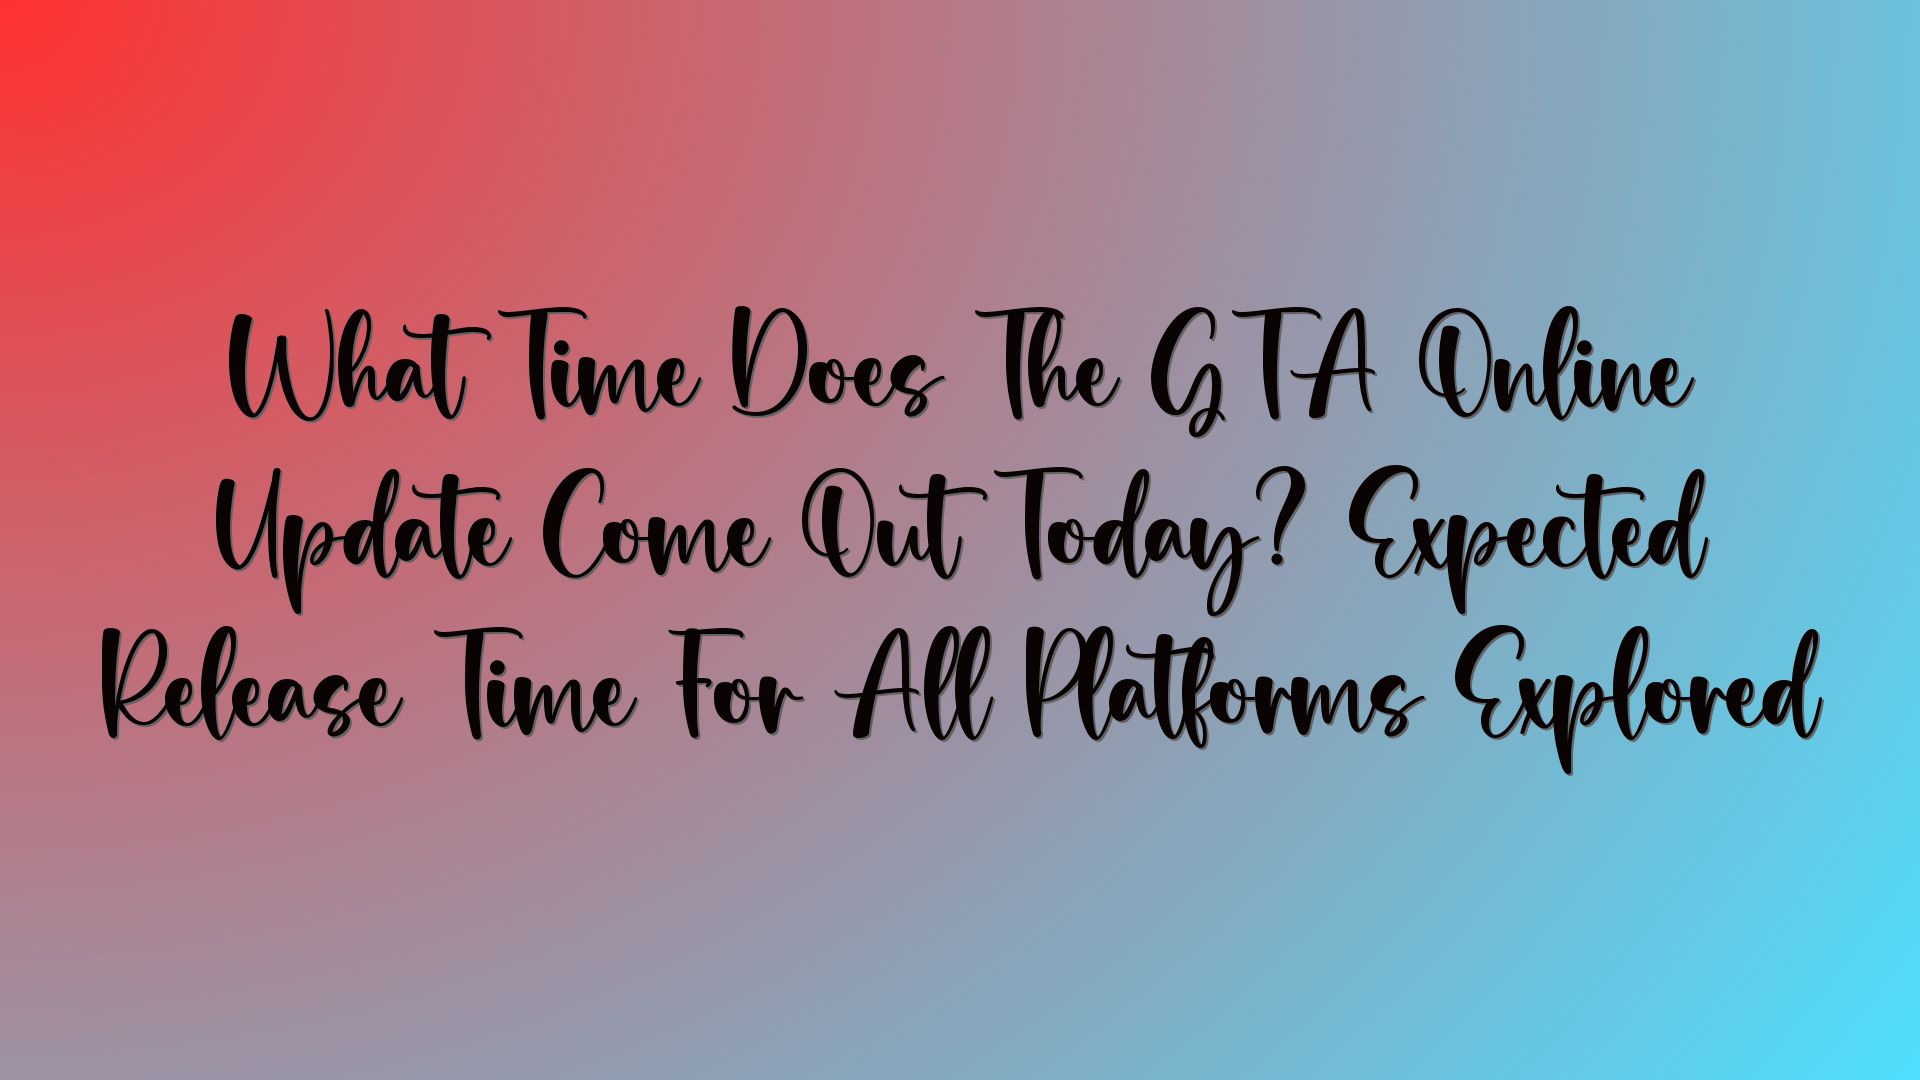 What Time Does The GTA Online Update Come Out Today? Expected Release Time For All Platforms Explored